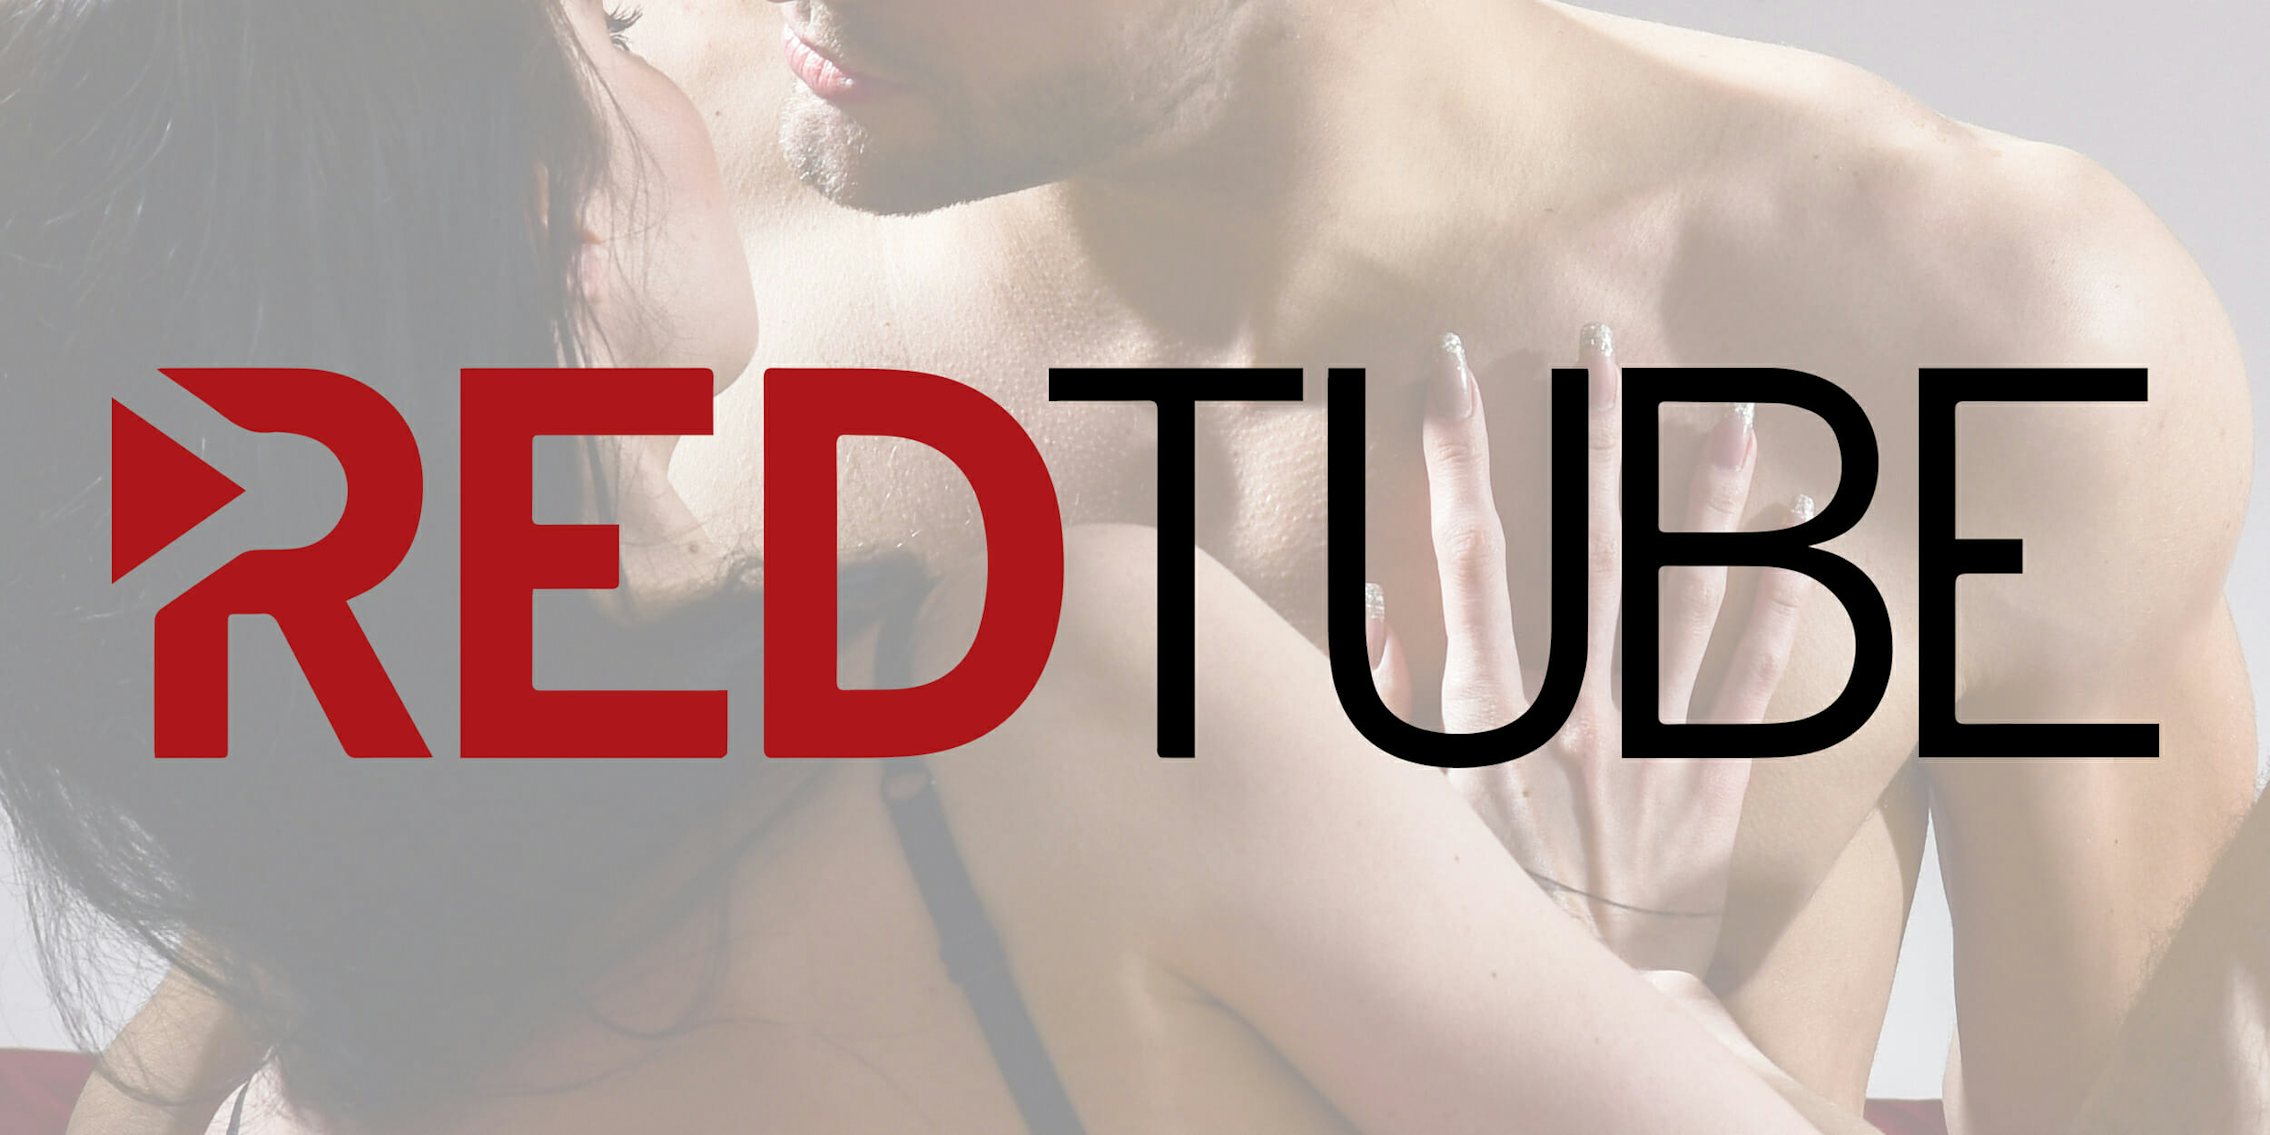 Redtubevideo - Is a Redtube Premium Membership Worth It? Cost, Features & More